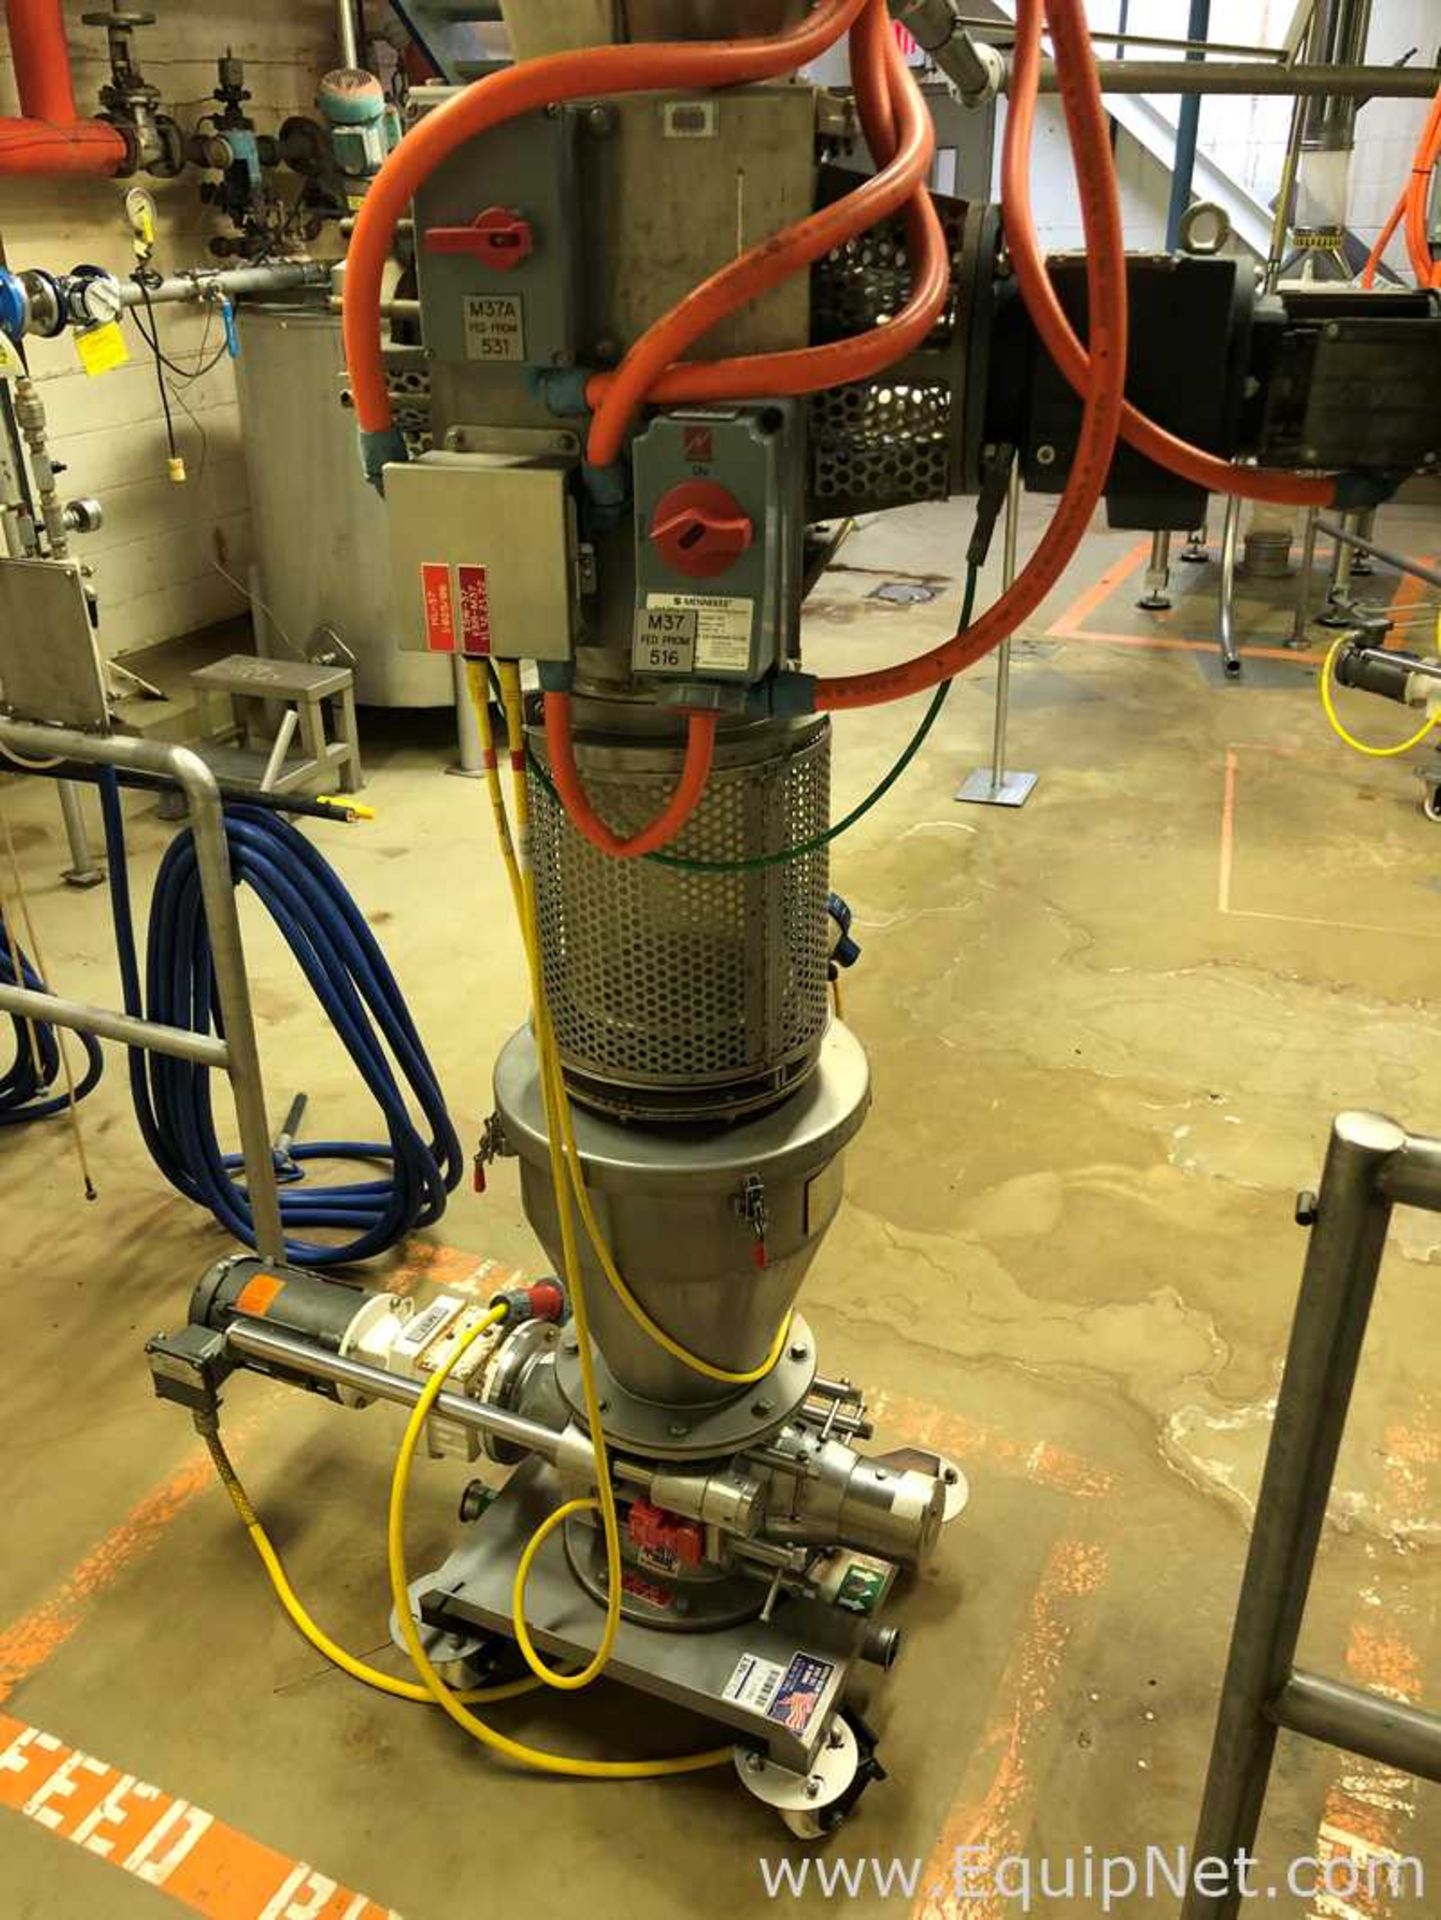 One Vacuum Conveyor System Vac-U-Max With Hopper And One Rotary Valve - Image 5 of 9